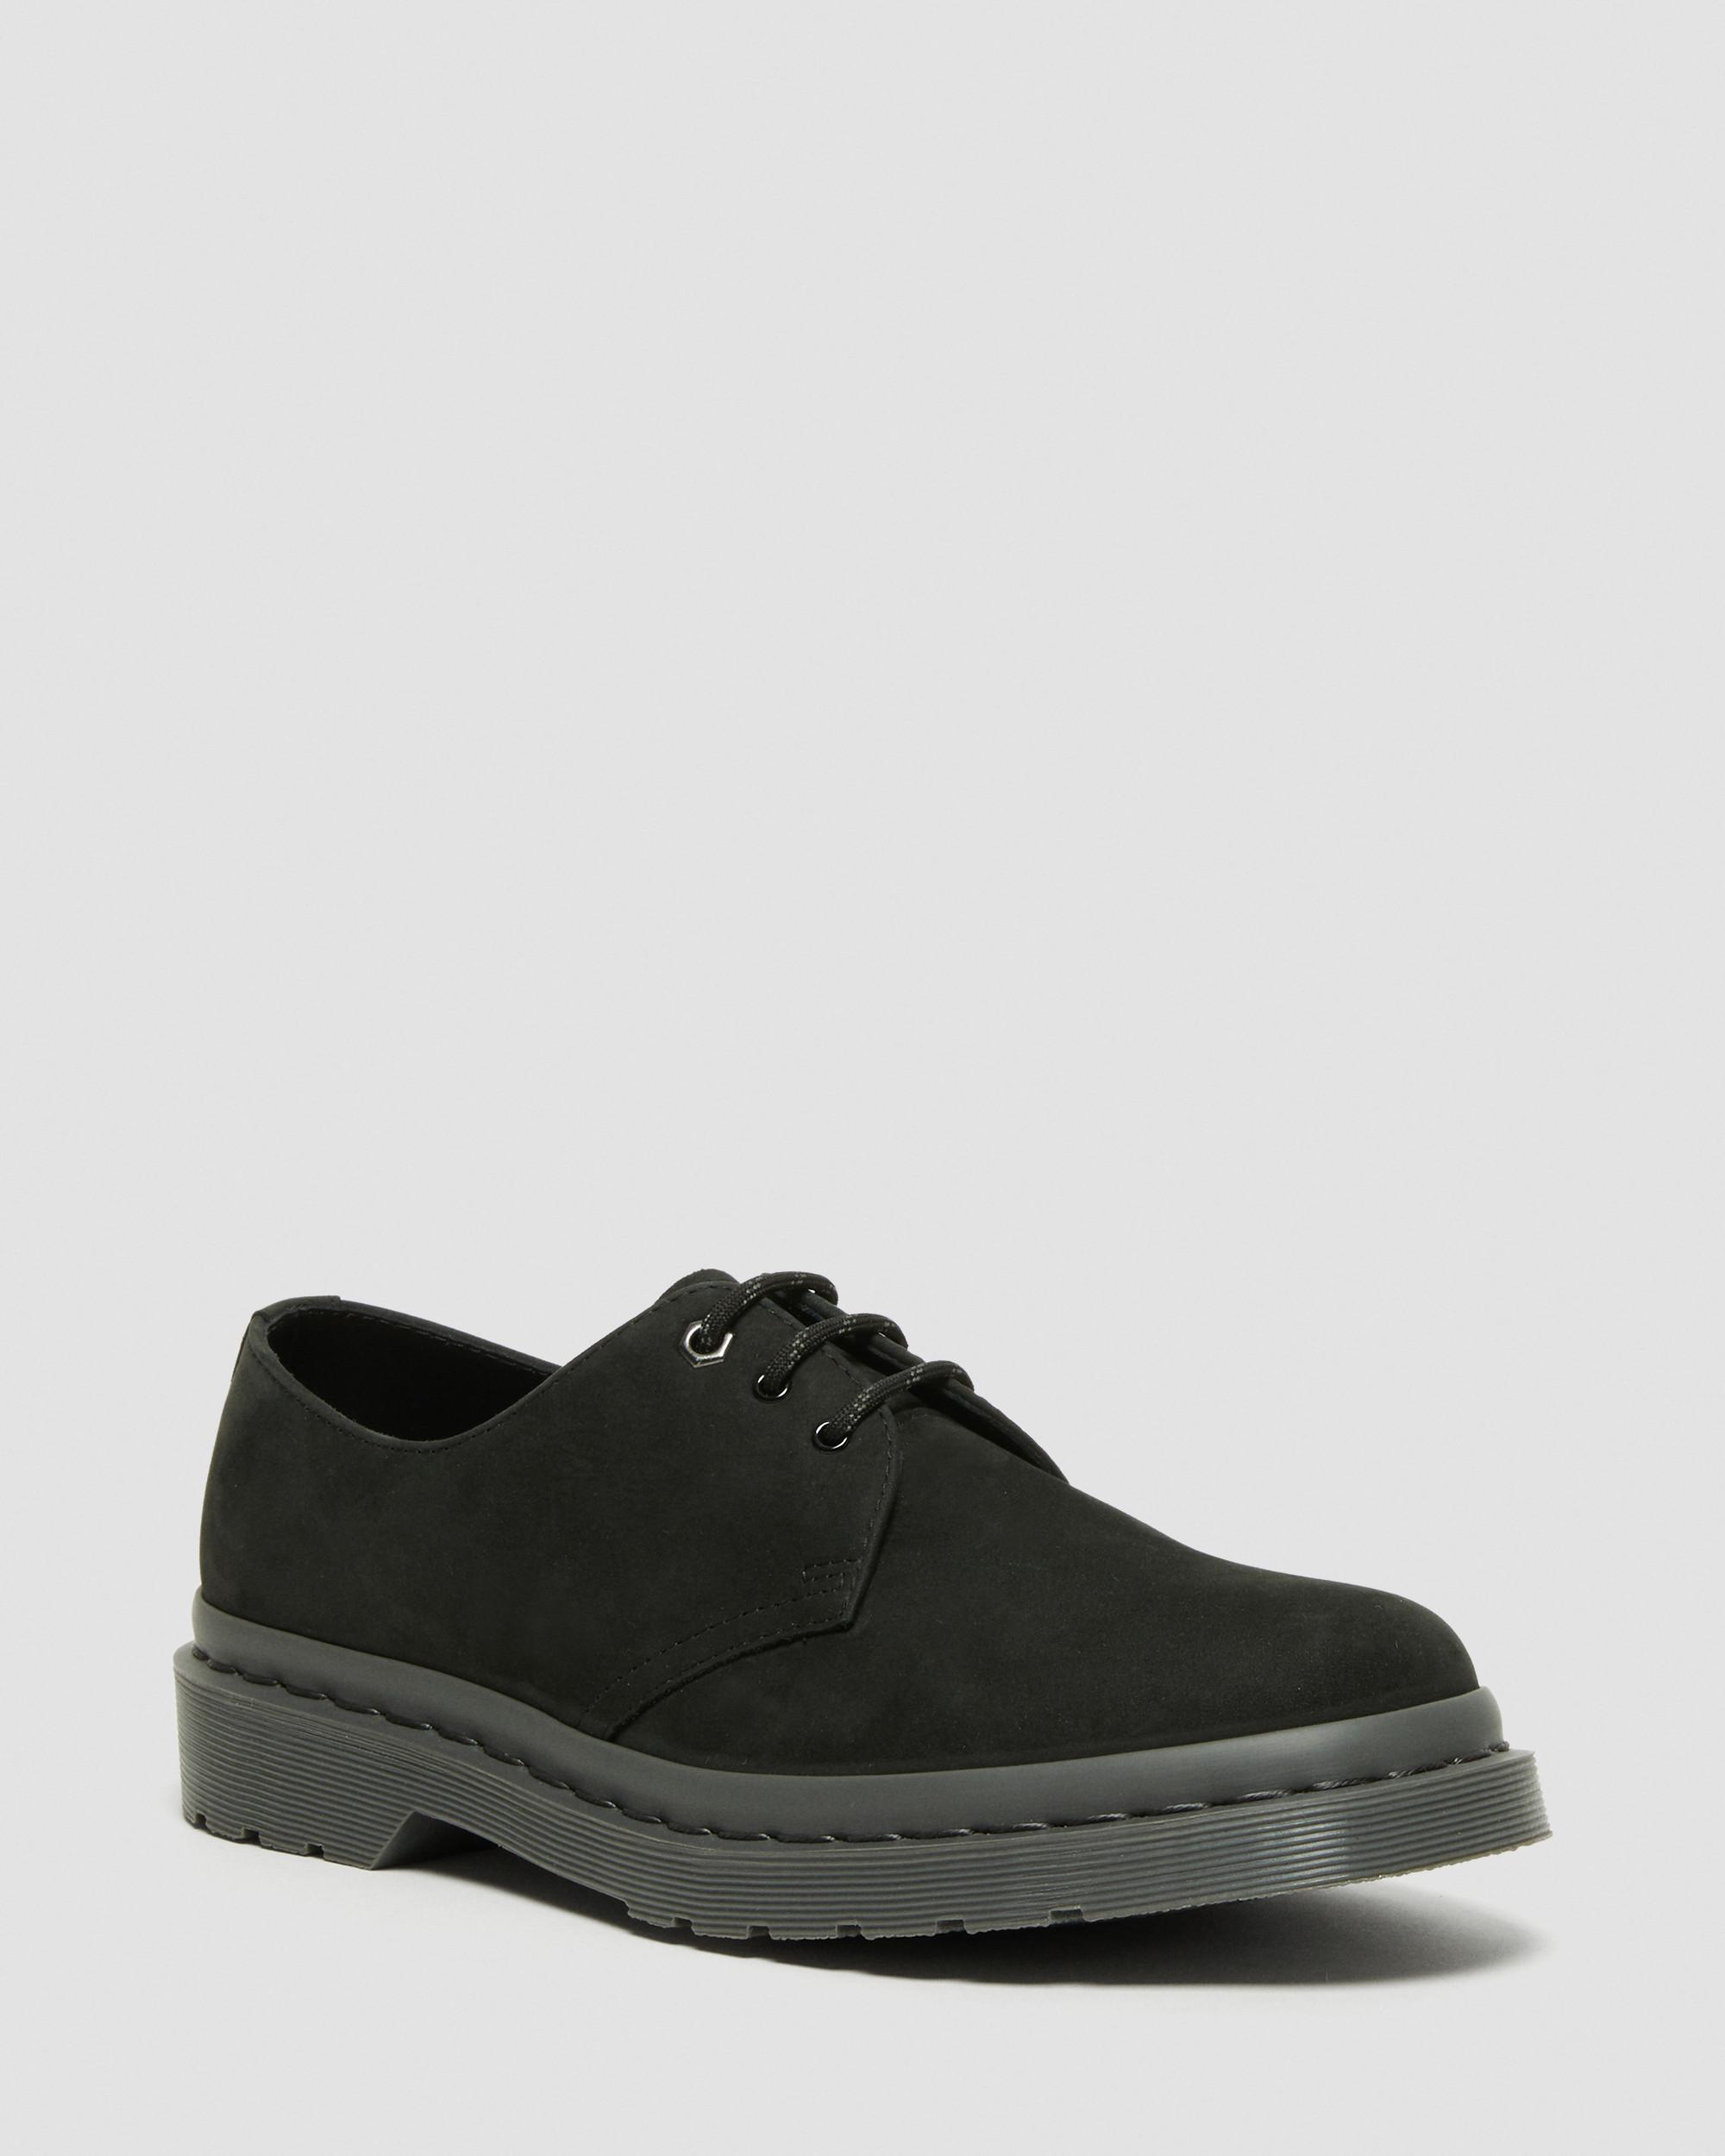 1461 Mono Milled Nubuck Leather Oxford Shoes | Dr. Martens